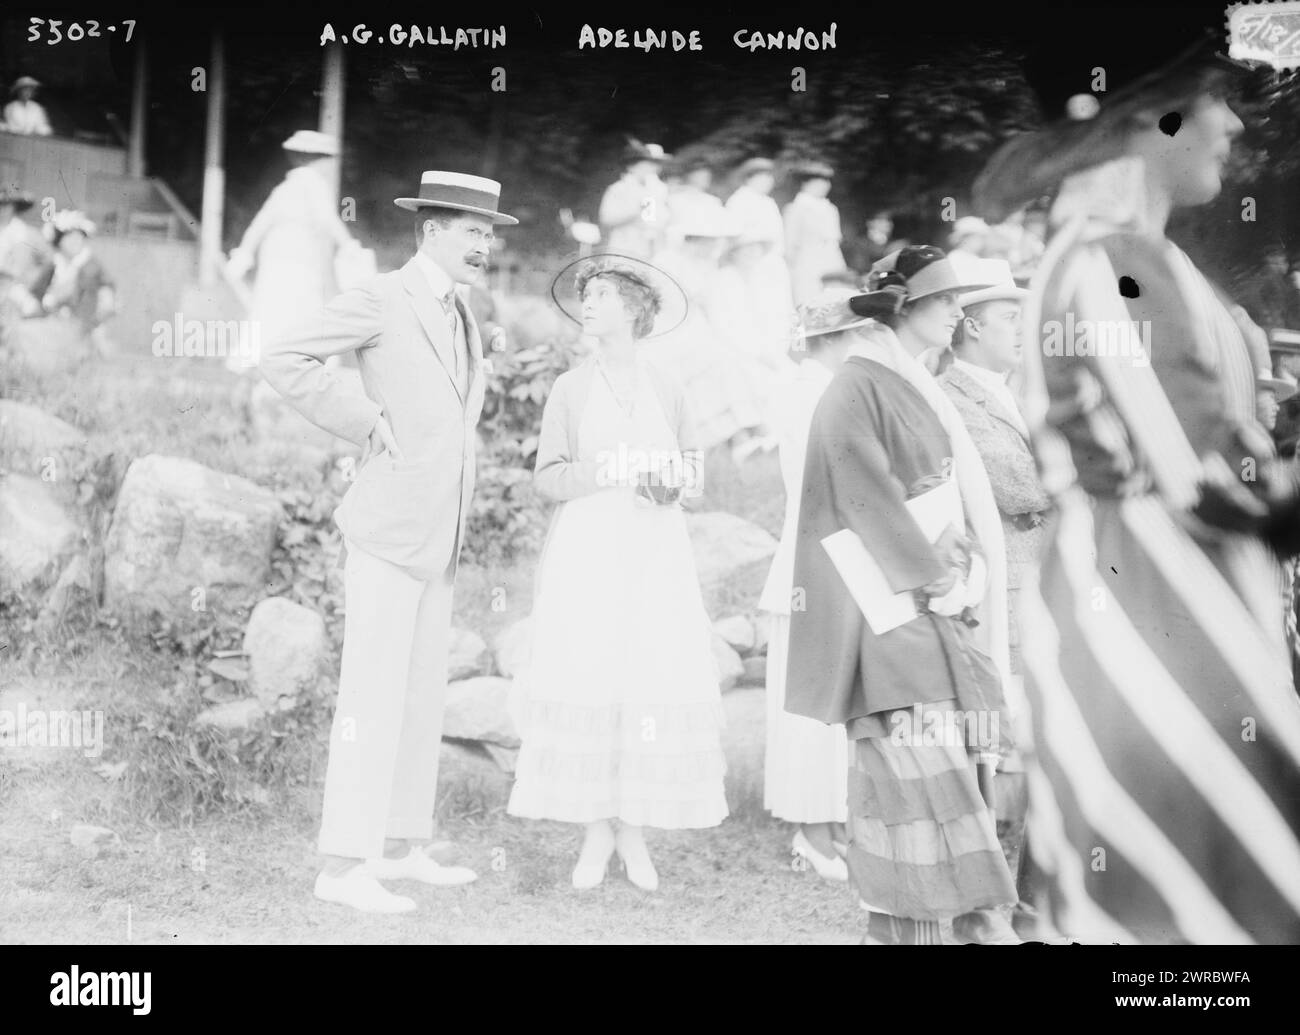 A.G. i.e., A.E. Gallatin, Adelaide Cannon, Photograph shows art collector and painter Albert Eugene Gallatin (1881-1952) with Miss Adelaide Cannon, the daughter of Mrs. Theodore P. Frelinghuysen and Henry Le Grand Cannon., 1915 August 18, Glass negatives, 1 negative: glass Stock Photo